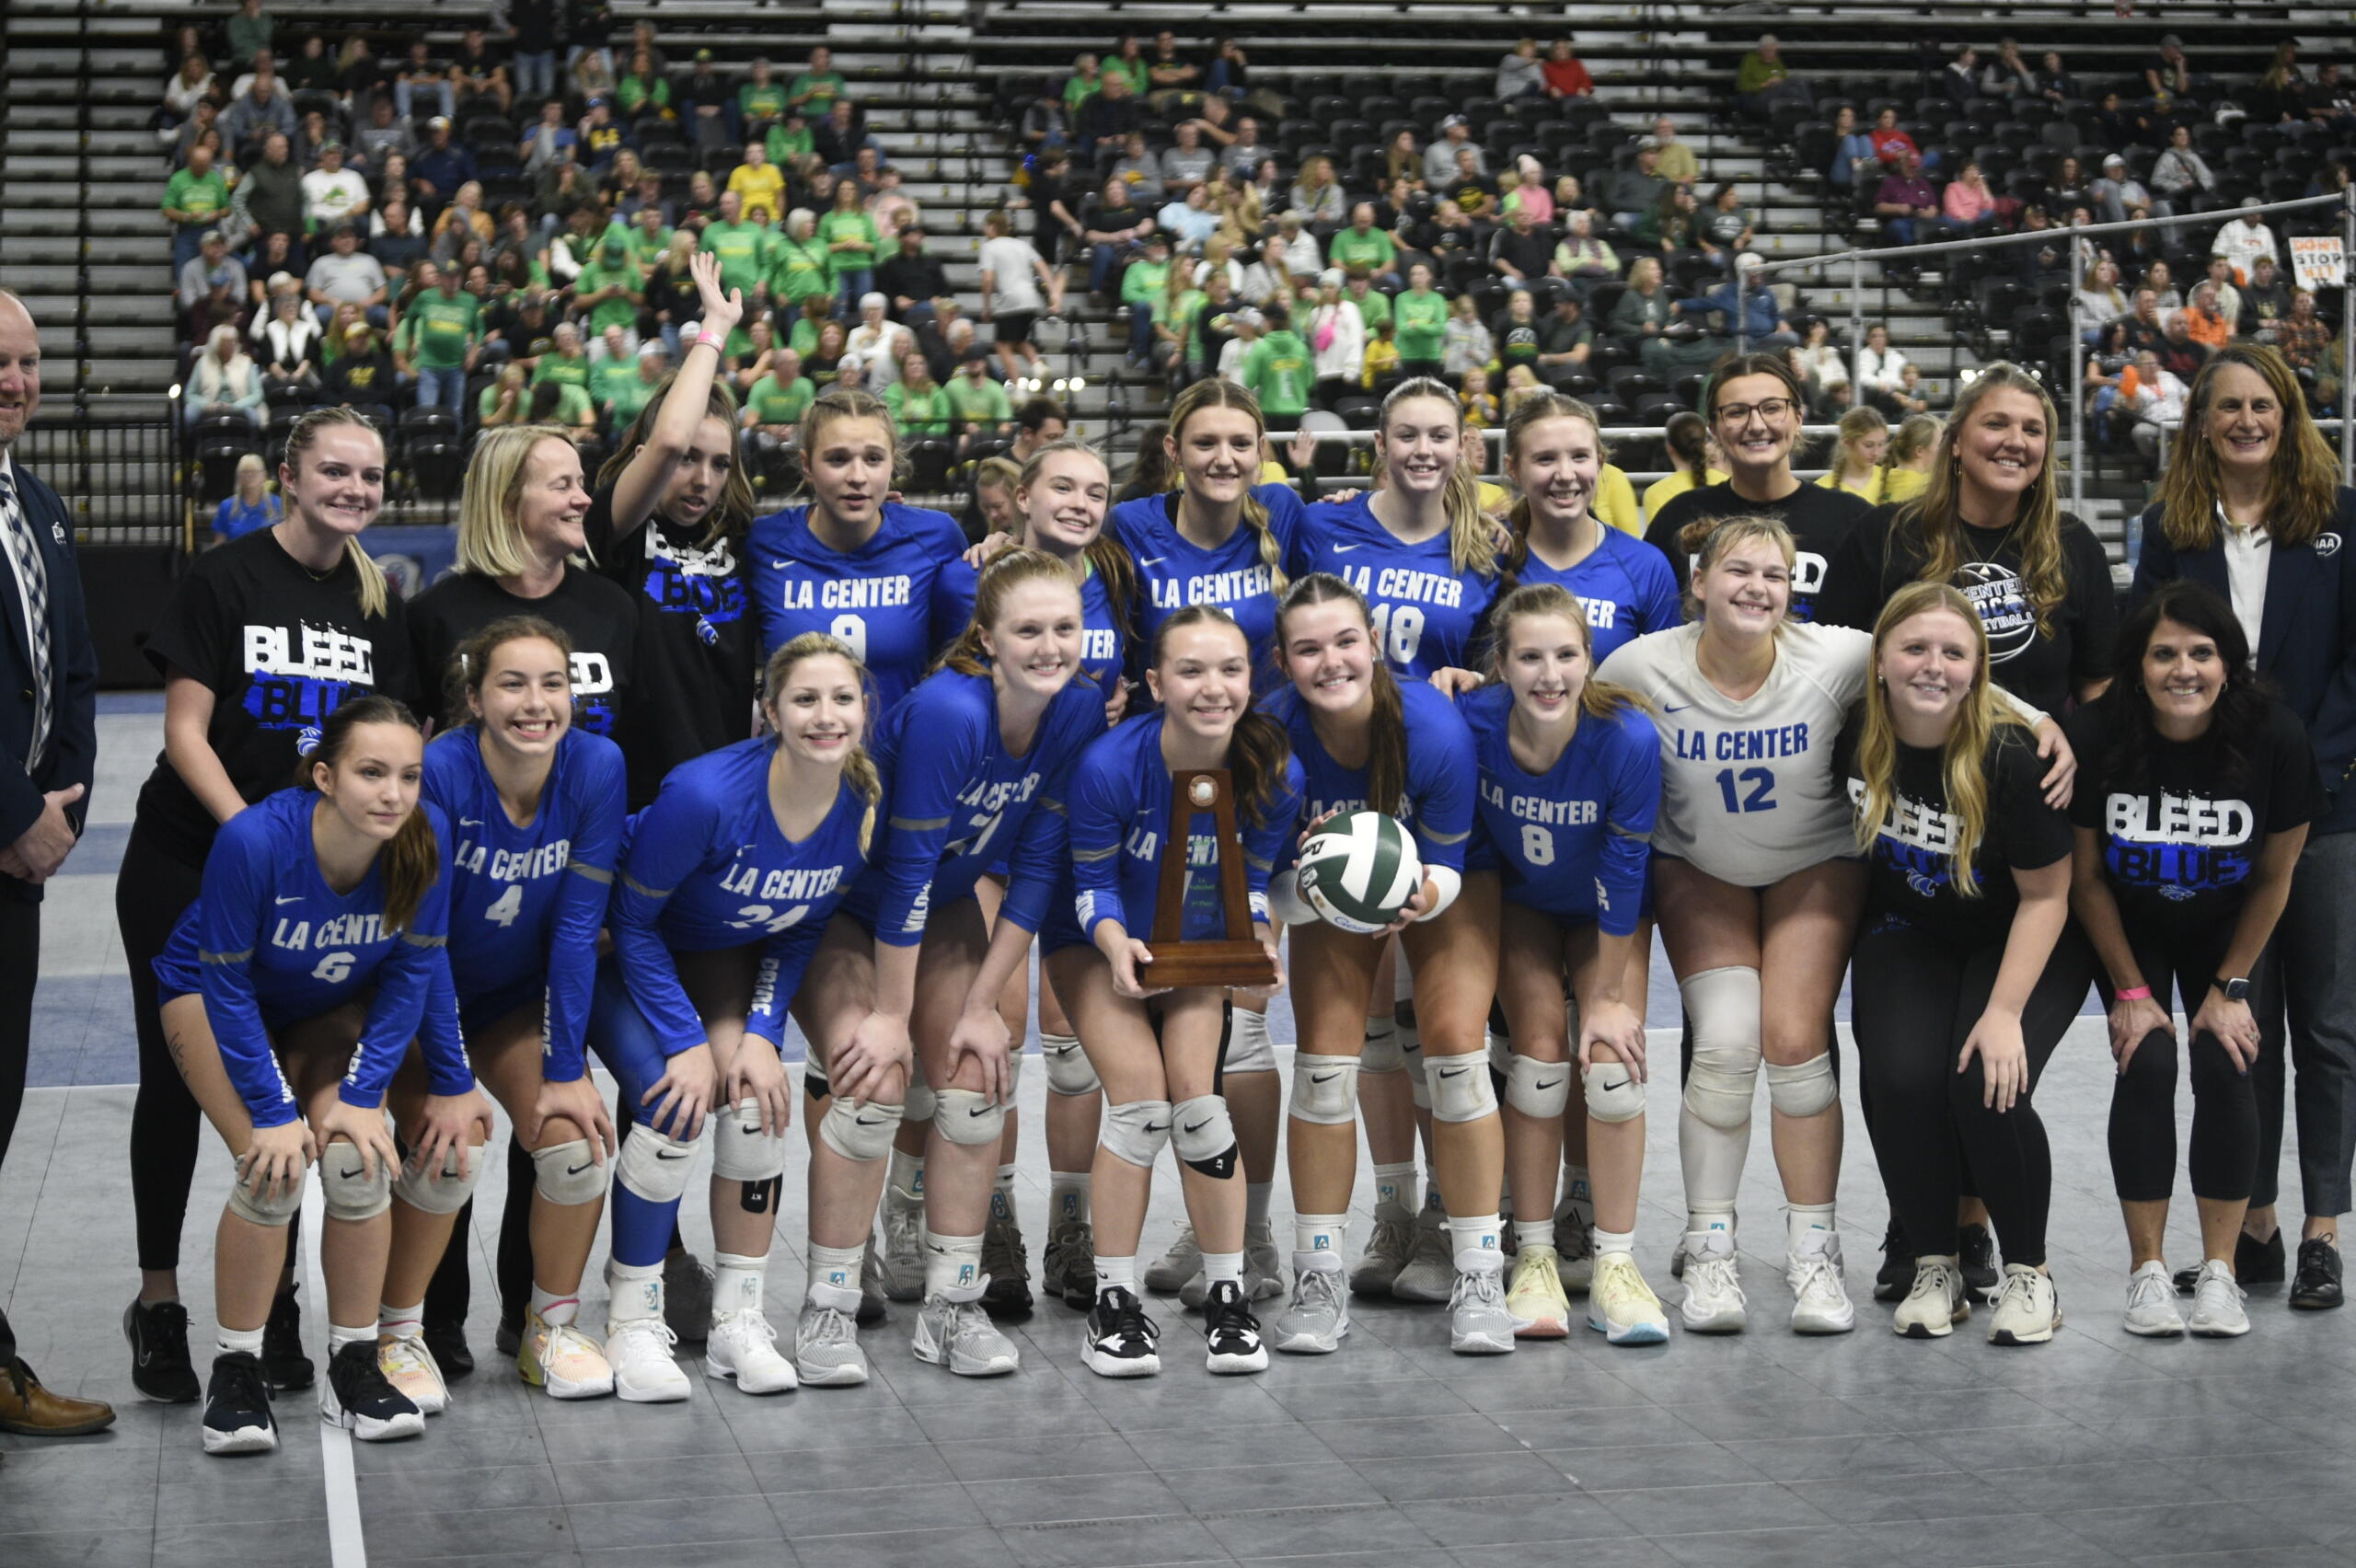 Jubilant unified team wins volleyball state championship | EastBayRI.com -  News, Opinion, Things to Do in the East Bay